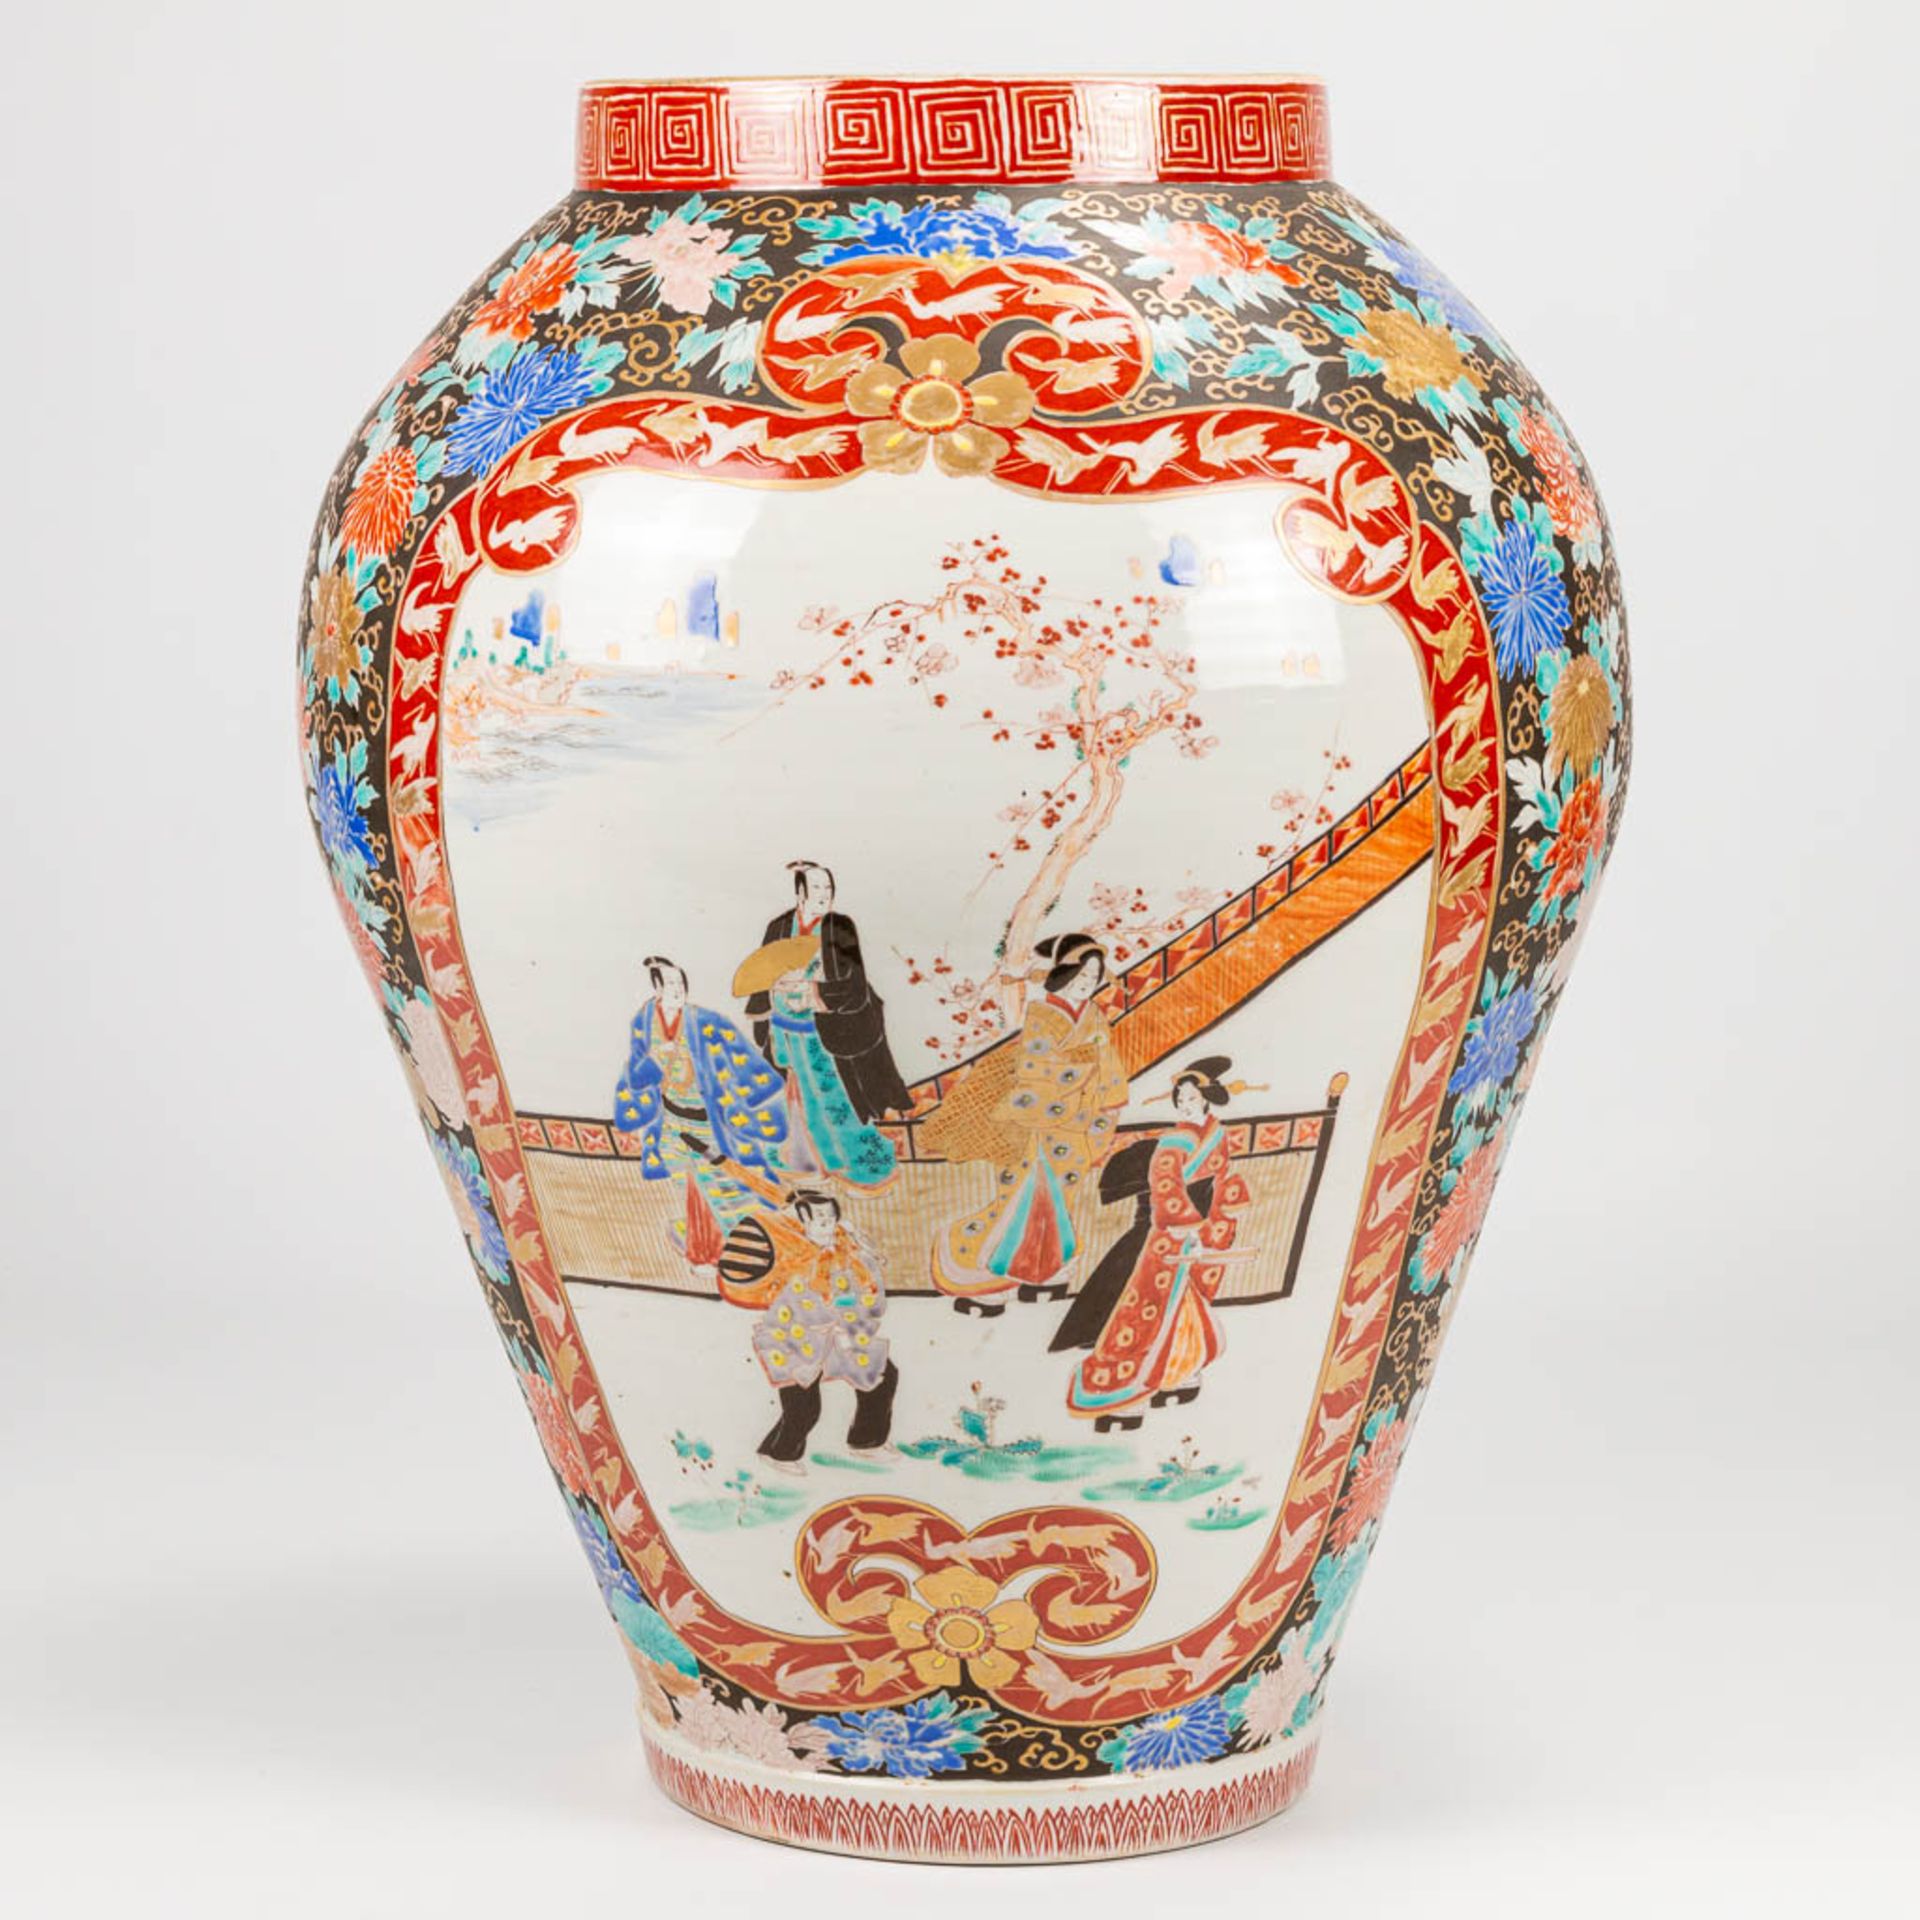 A large Imari display vase made of hand-painted porcelain in Japan. 19th/20th century. (60 x 42 cm)